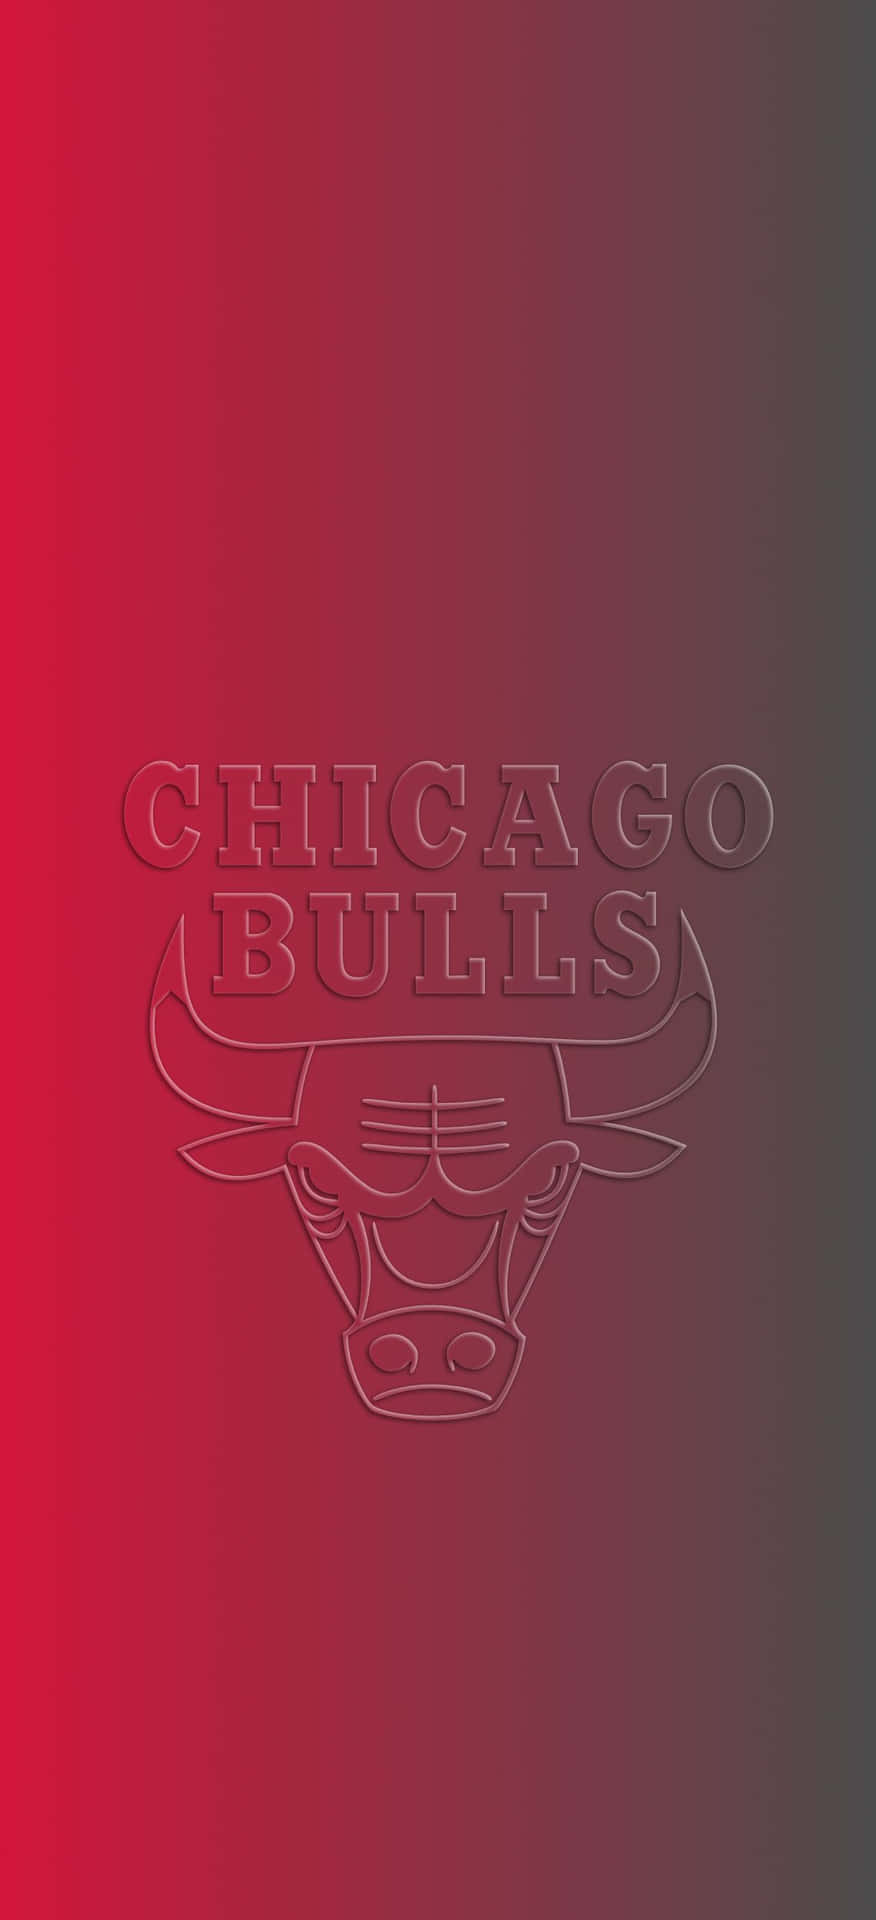 Show Your Passion For Basketball With The Chicago Bulls Iphone Wallpaper Background